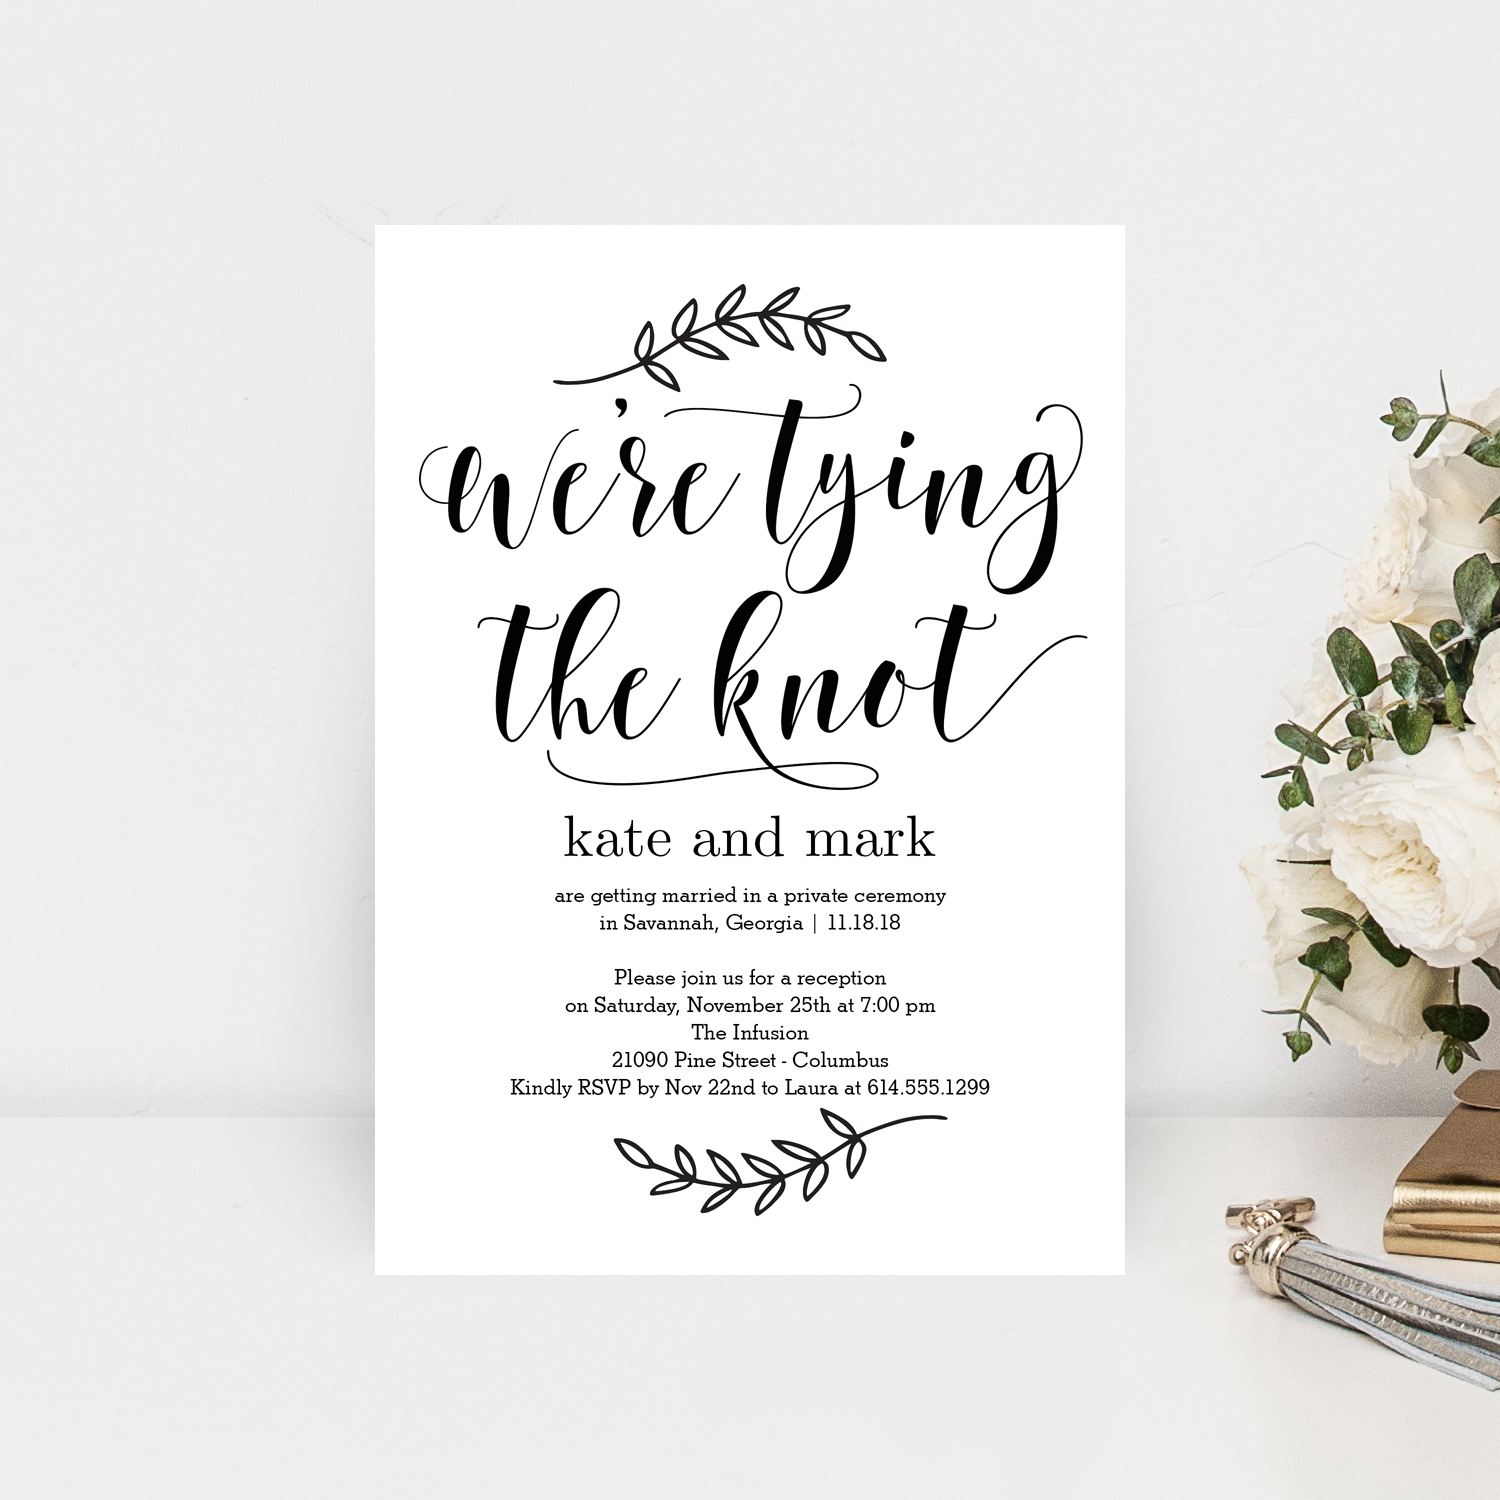 tie the knot wedding website search